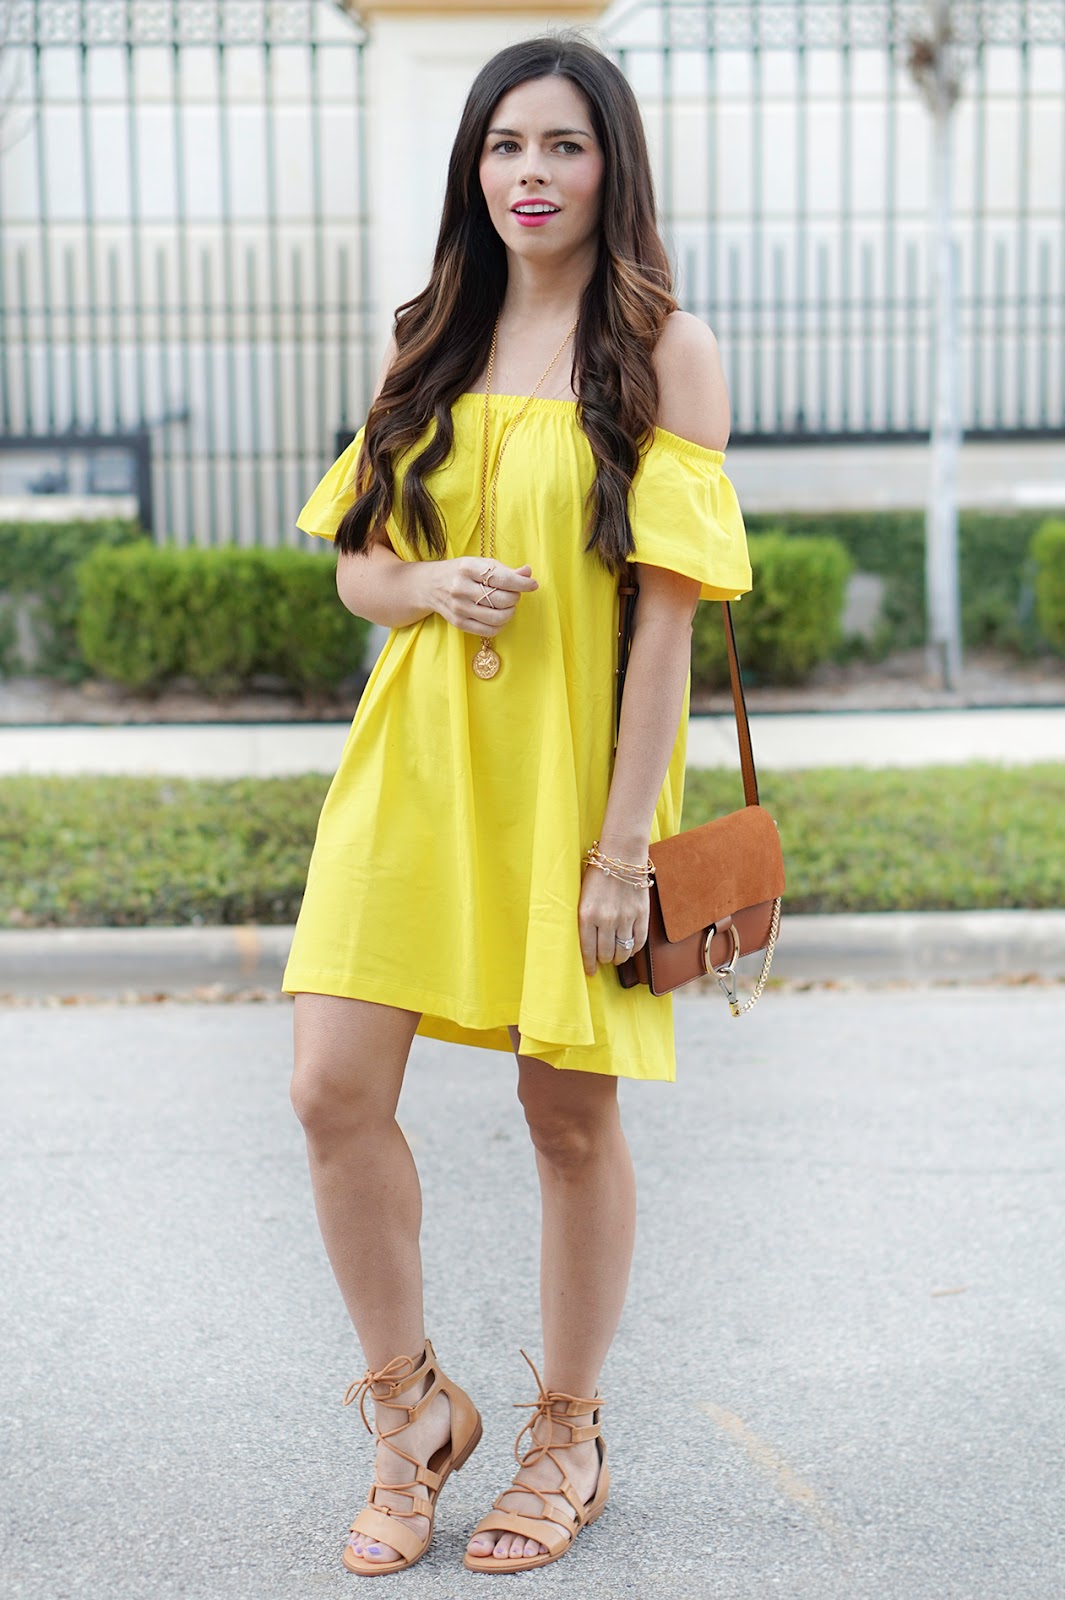 Off the shoulder yellow dress